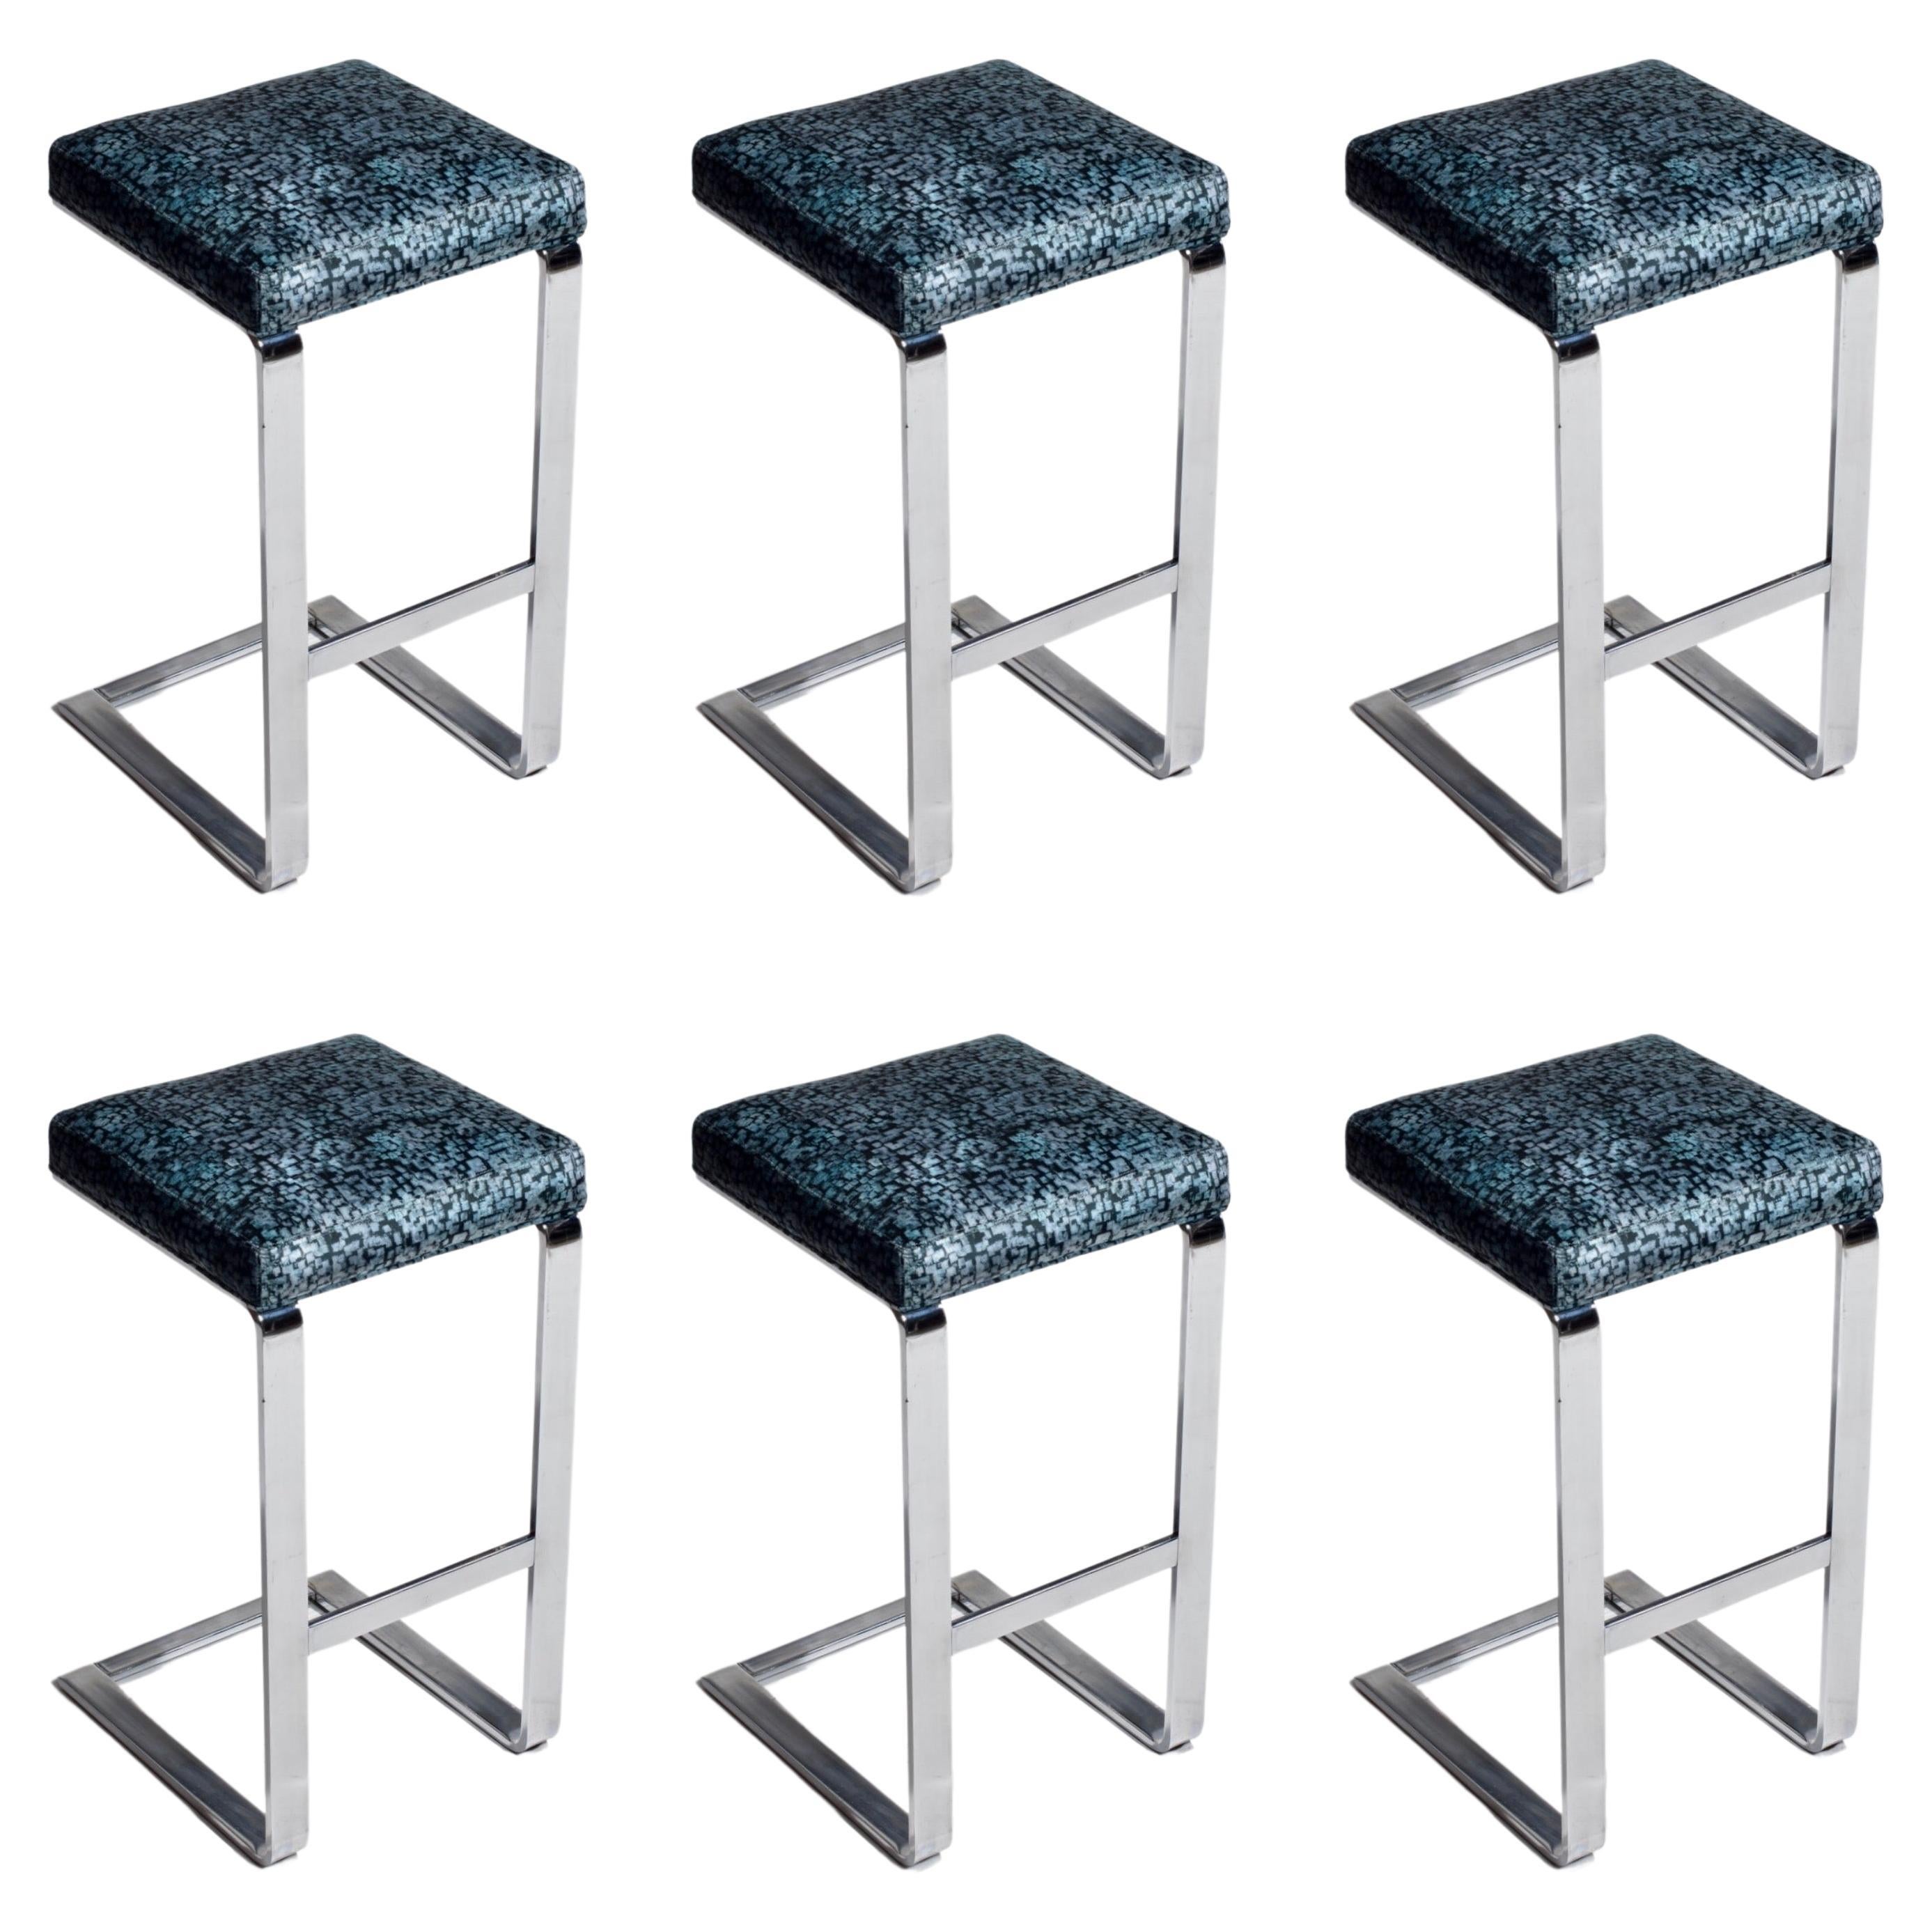 Set of Six Chrome-Plated Flat Bar Steel Barstools, Pace Collection, c1970s For Sale